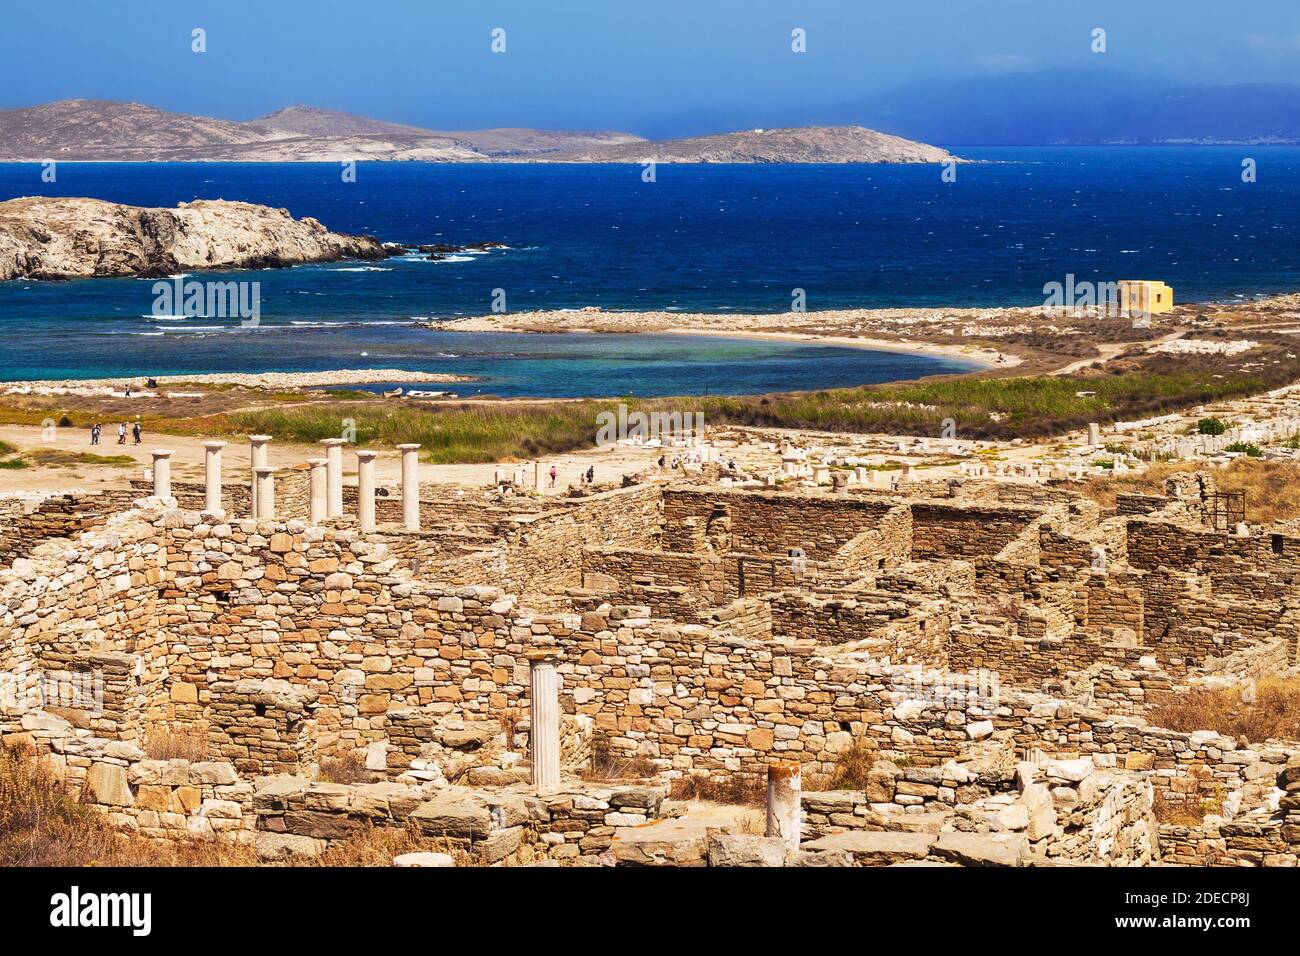 Ancient ruins on the island of Delos, Greece Stock Photo